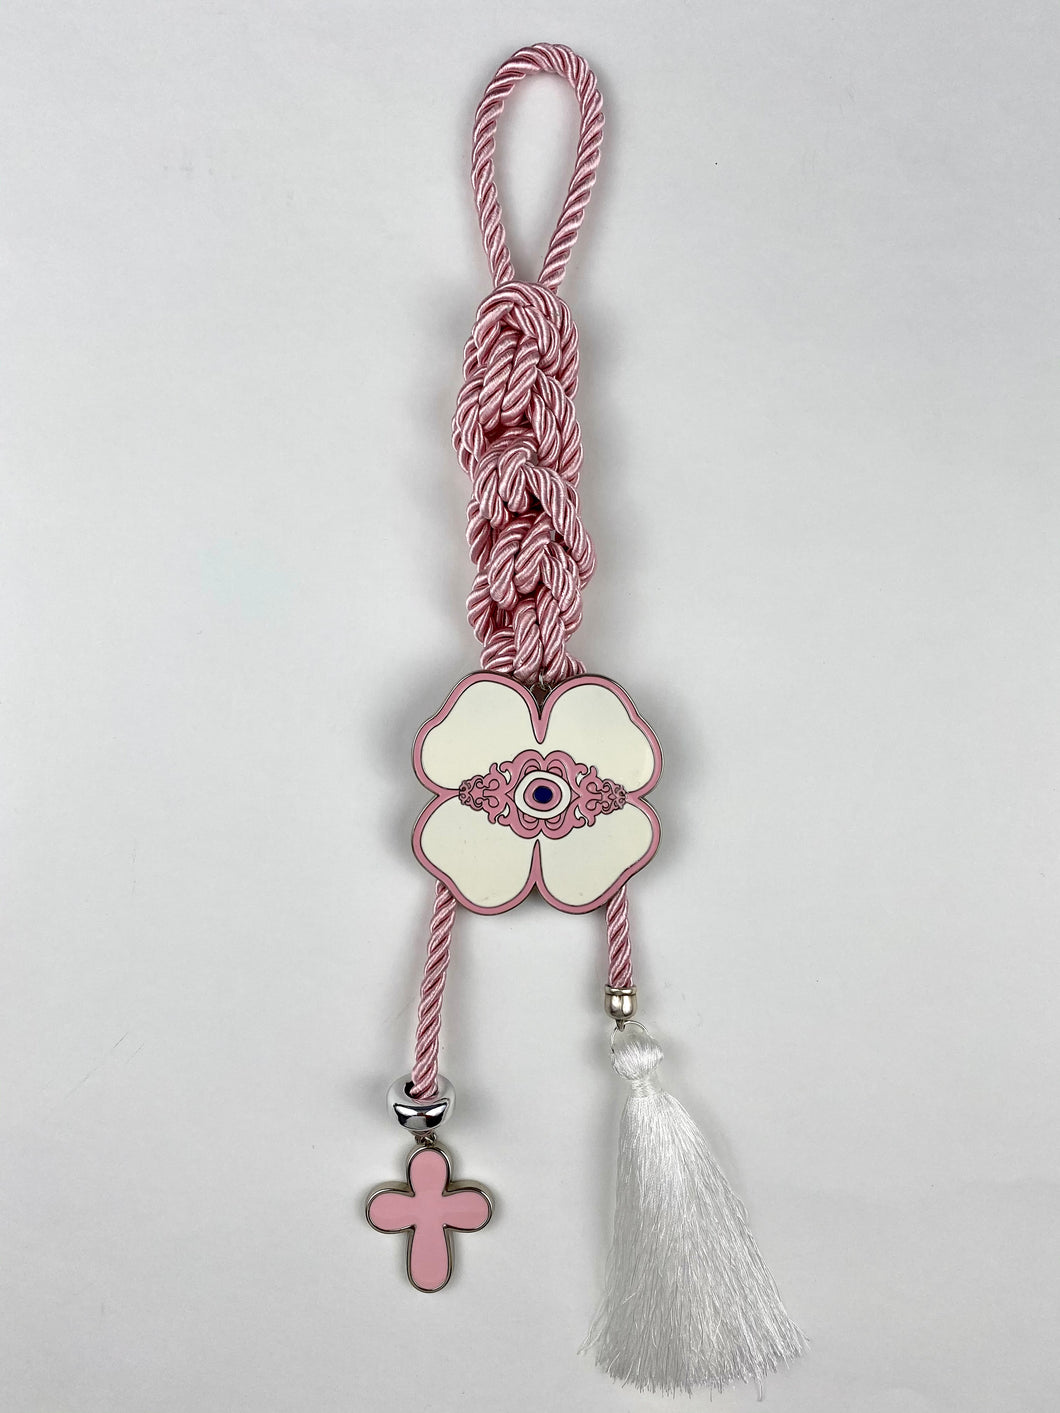 Gouri 202015 Pink Pearl Cord with Large Four leaf clover Evil Eye, Large Metal Cross with tassel